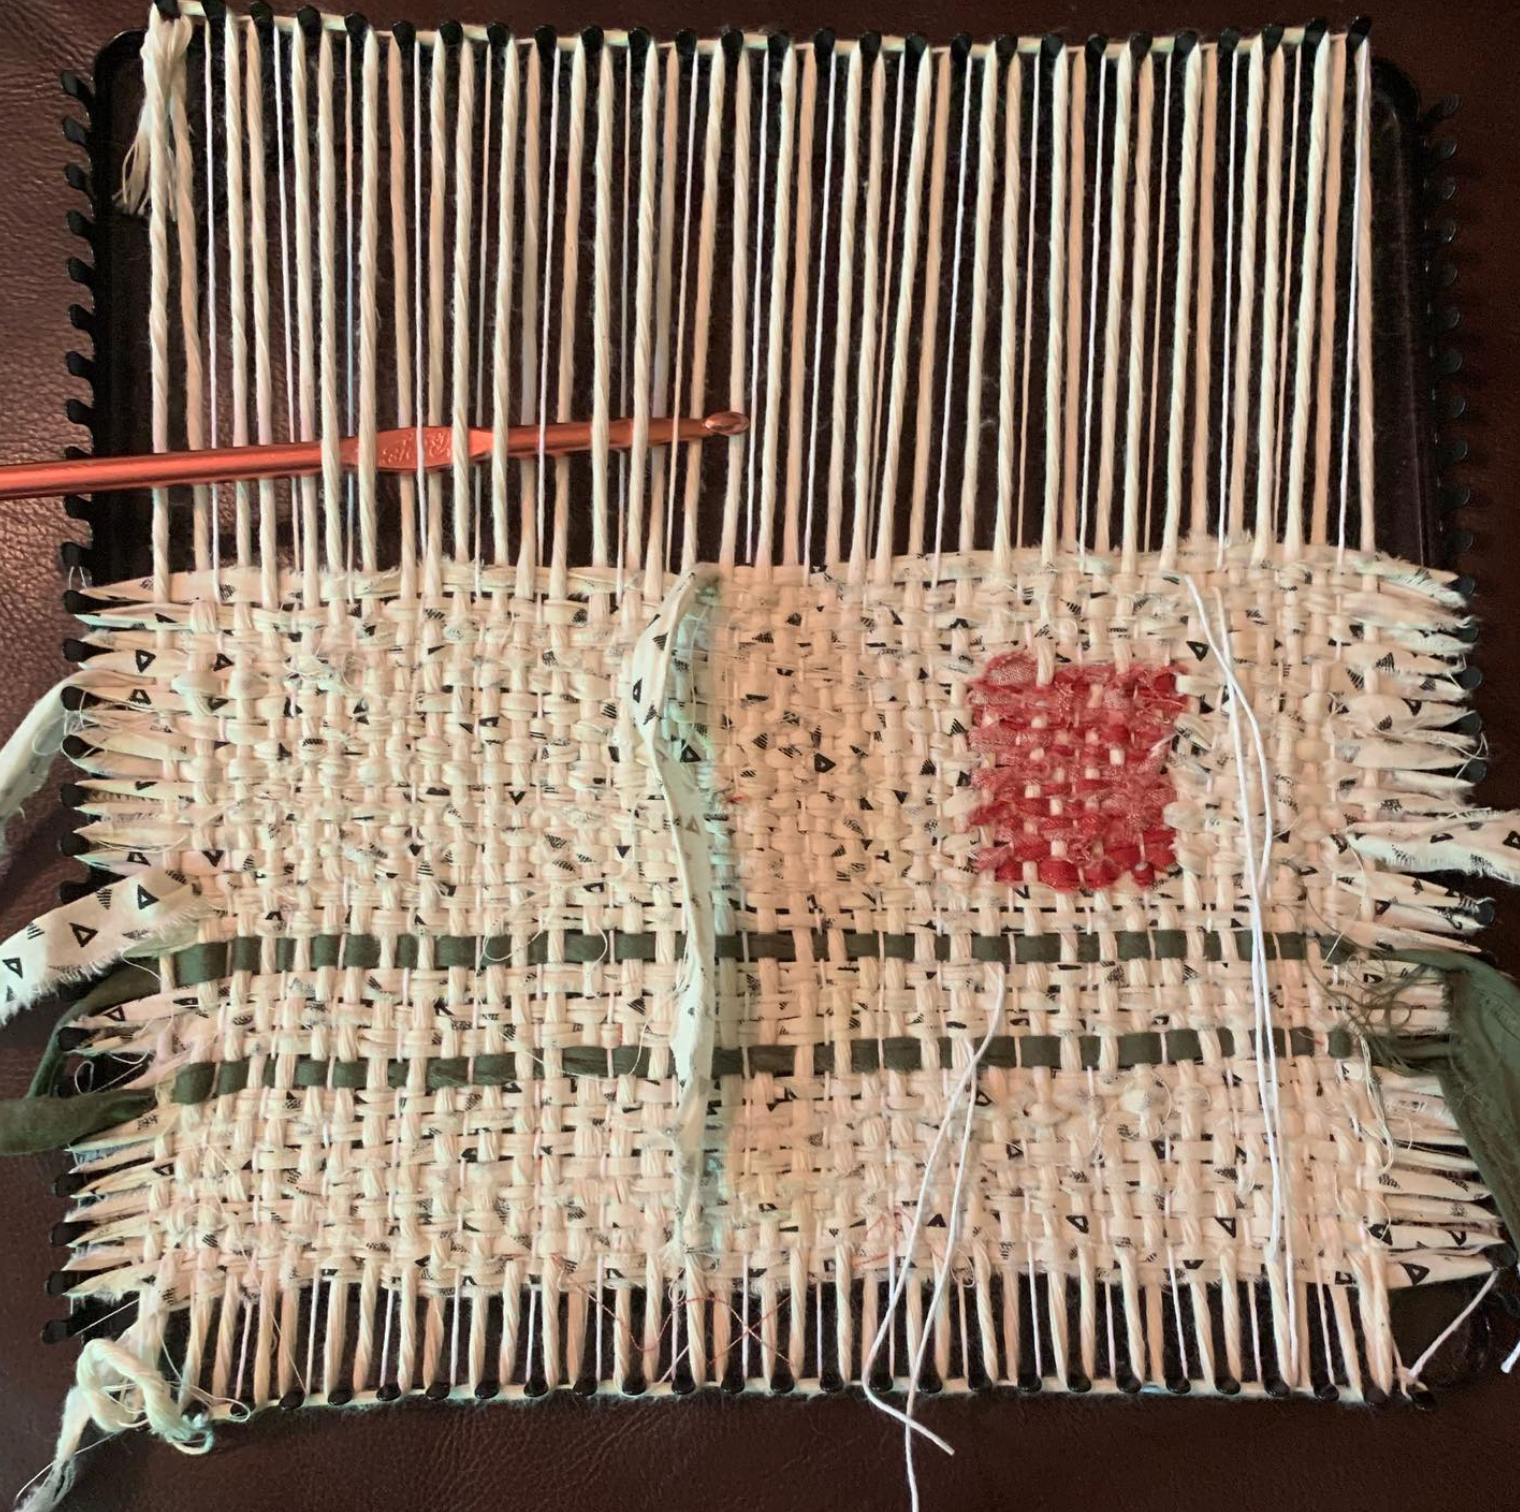 Workshop Recording - Beyond Potholders: using the potholder loom for weaving with yarn and more - with Suzanne Hokanson